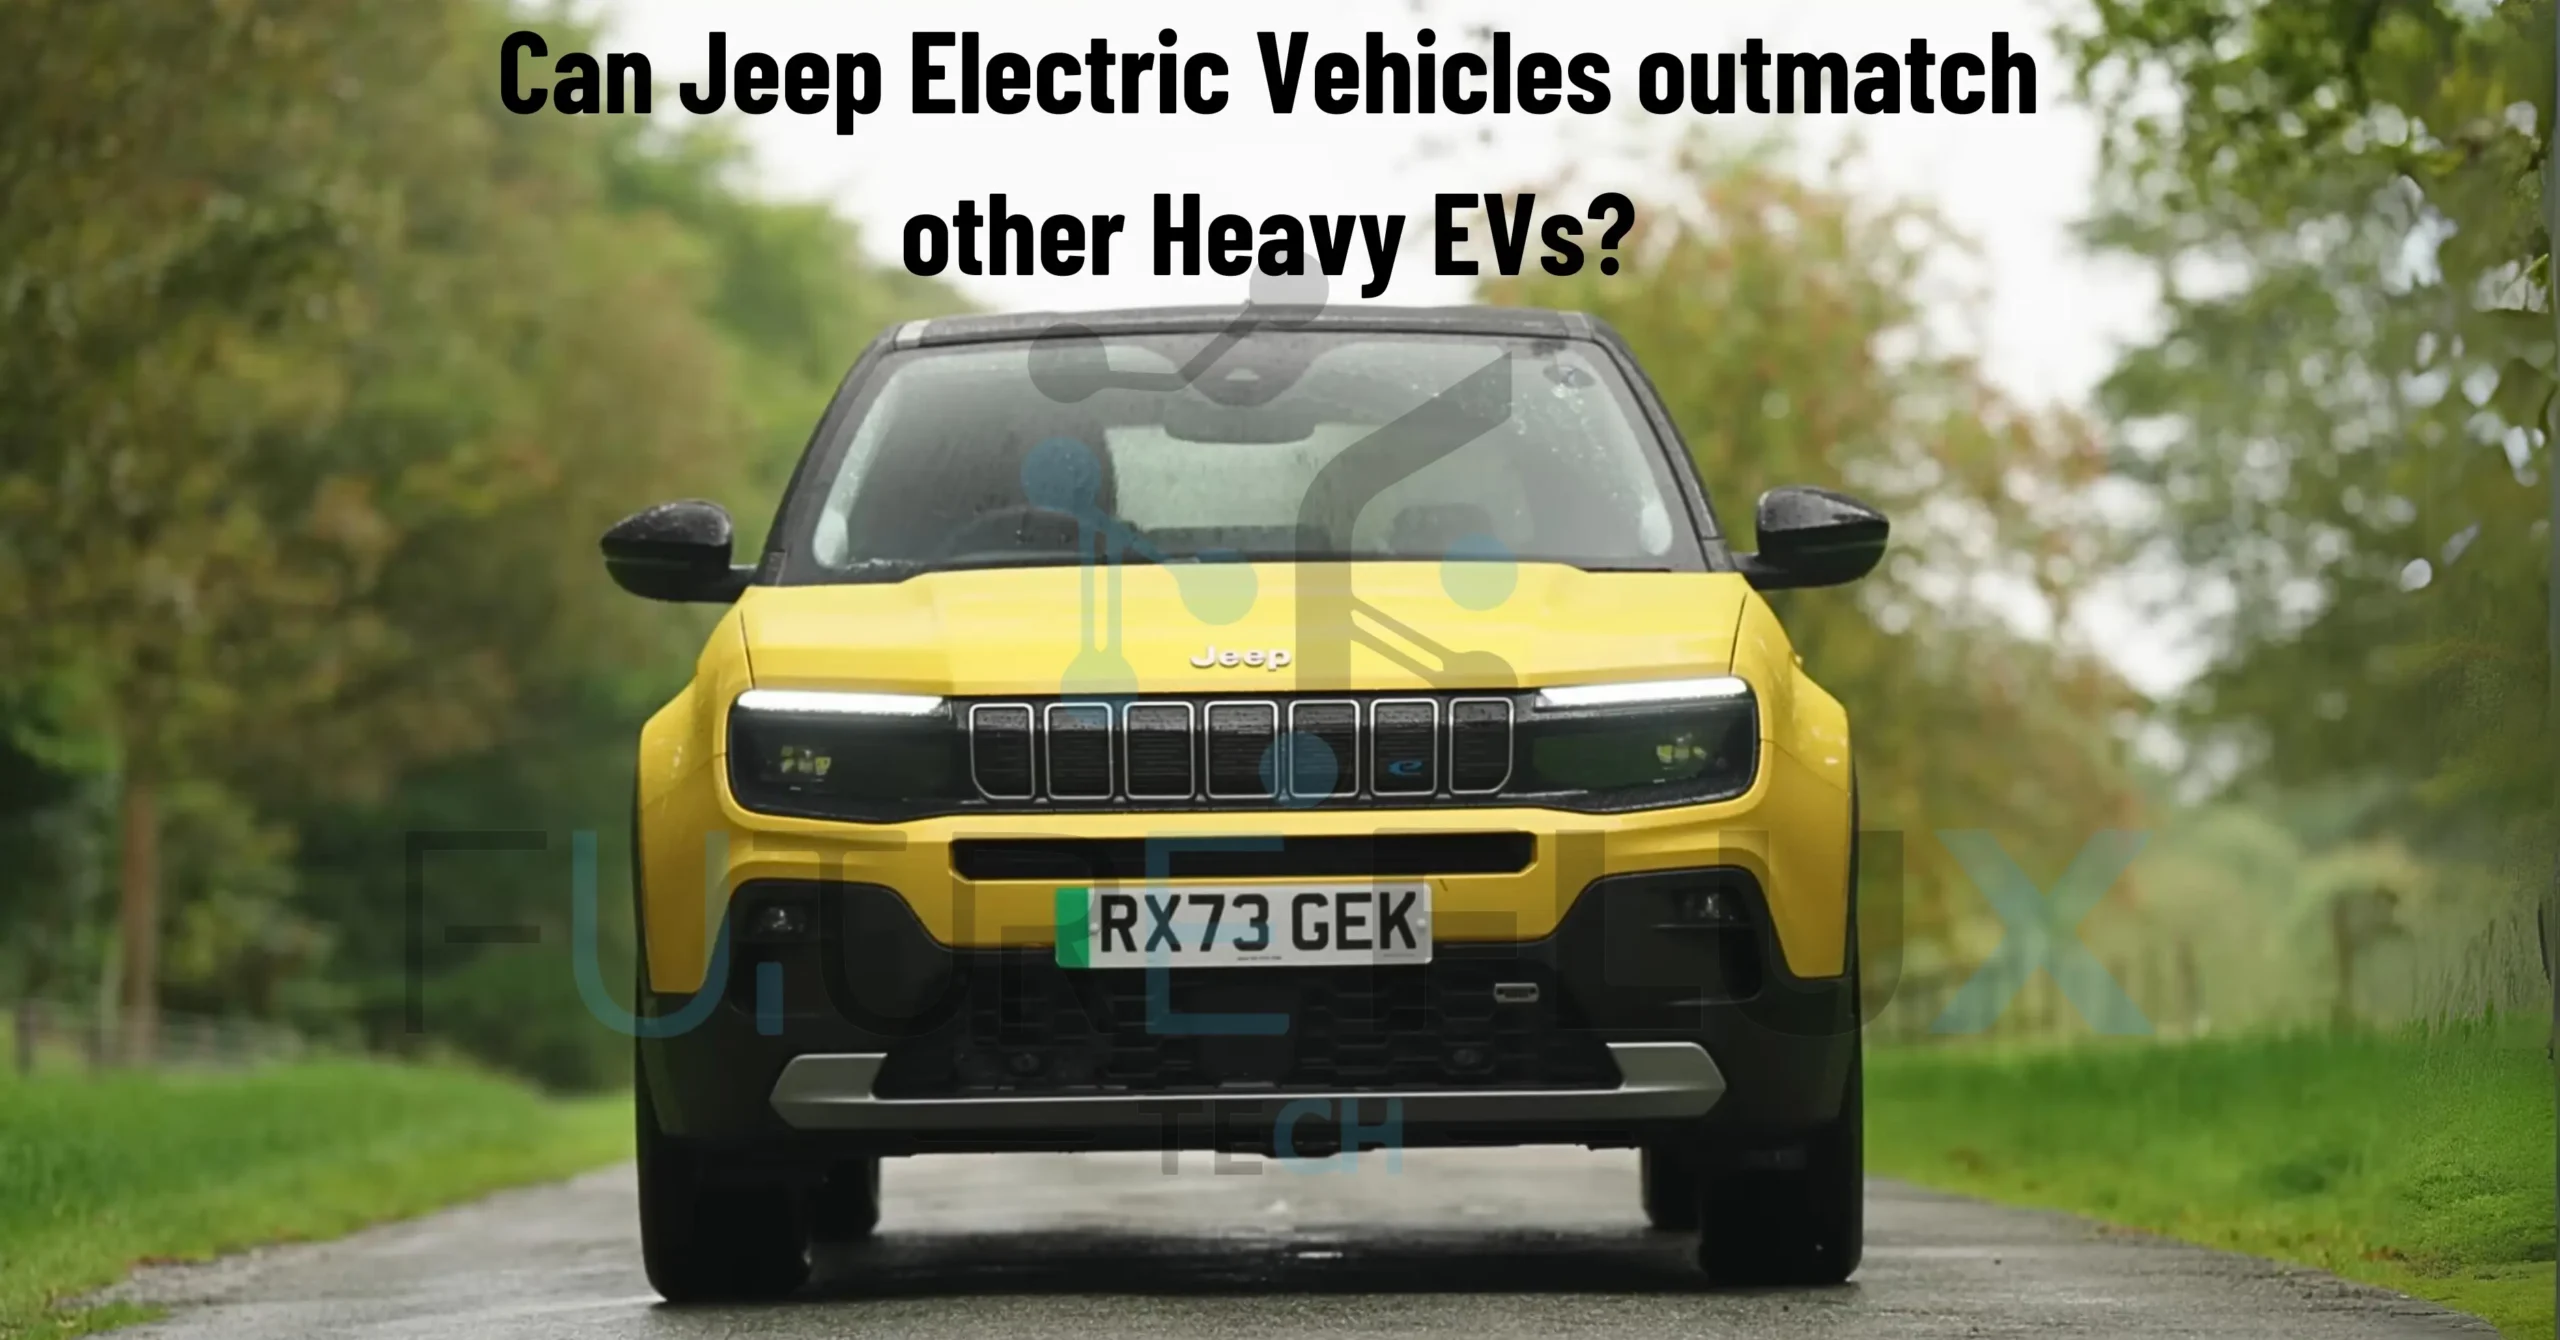 Can Jeep Electric Vehicles outmatch other Heavy EVs?